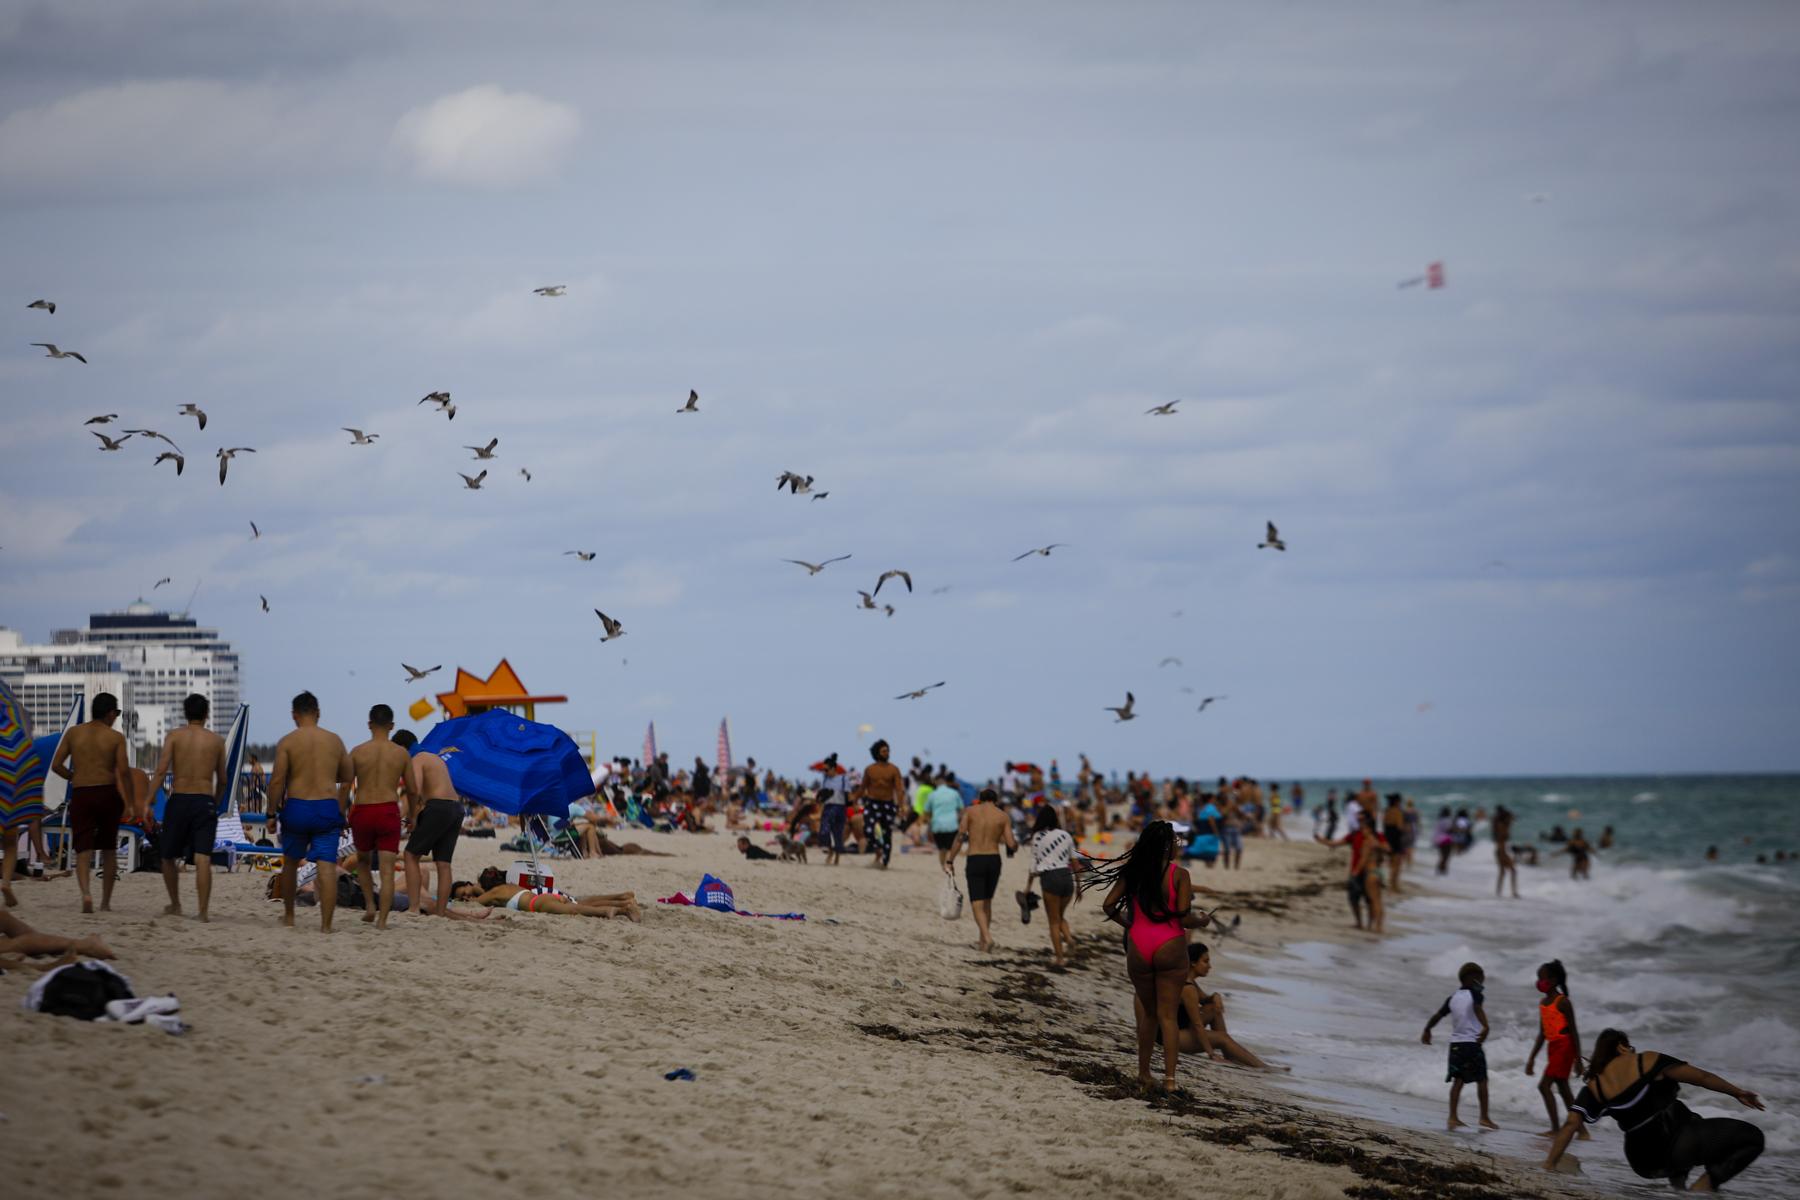 2021 - Spring Break @ Miami Beach - Tourists are see on the beach during Spring Break in...